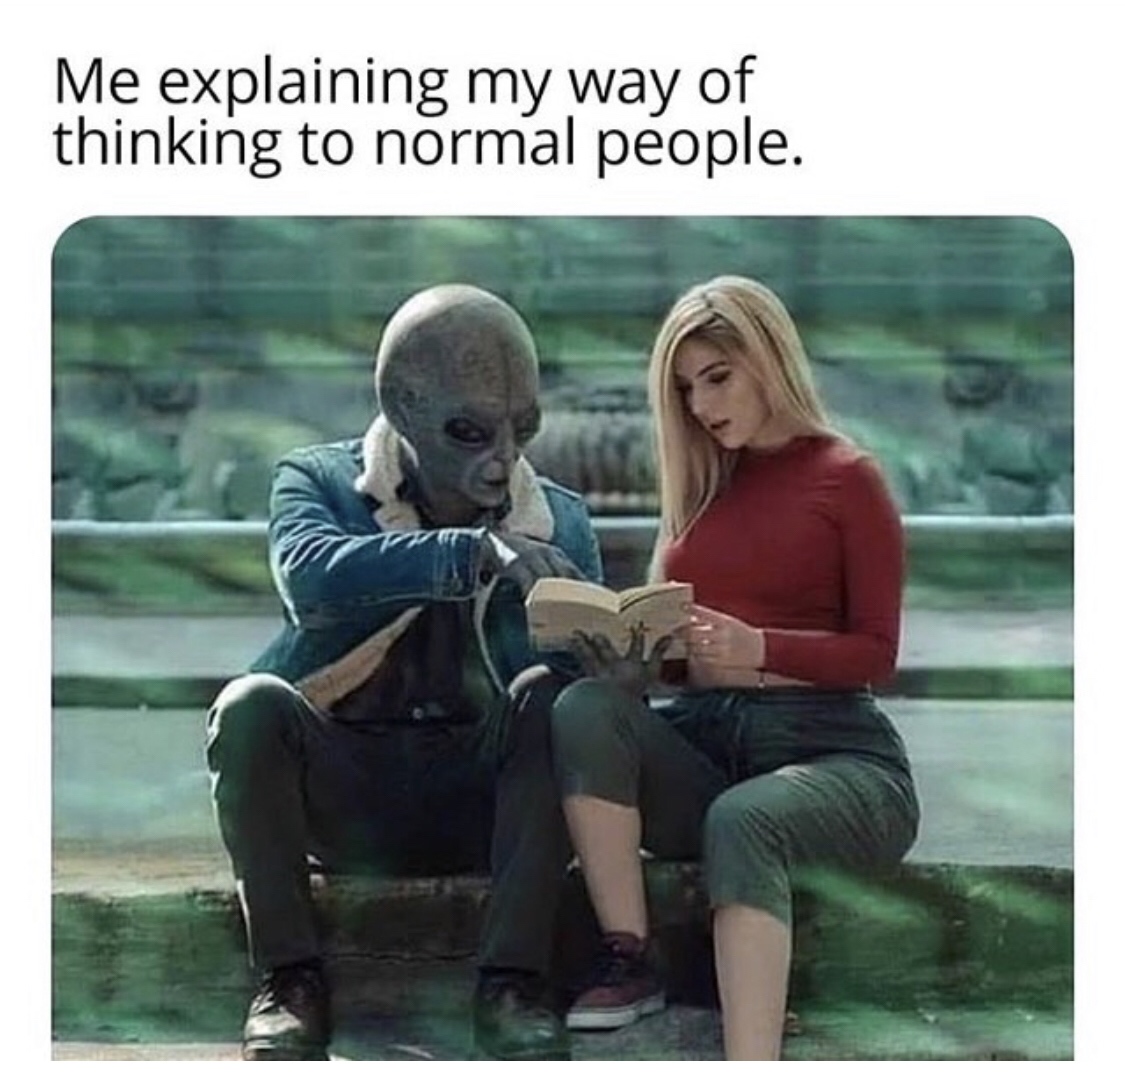 alien funny memes - Me explaining my way of thinking to normal people.